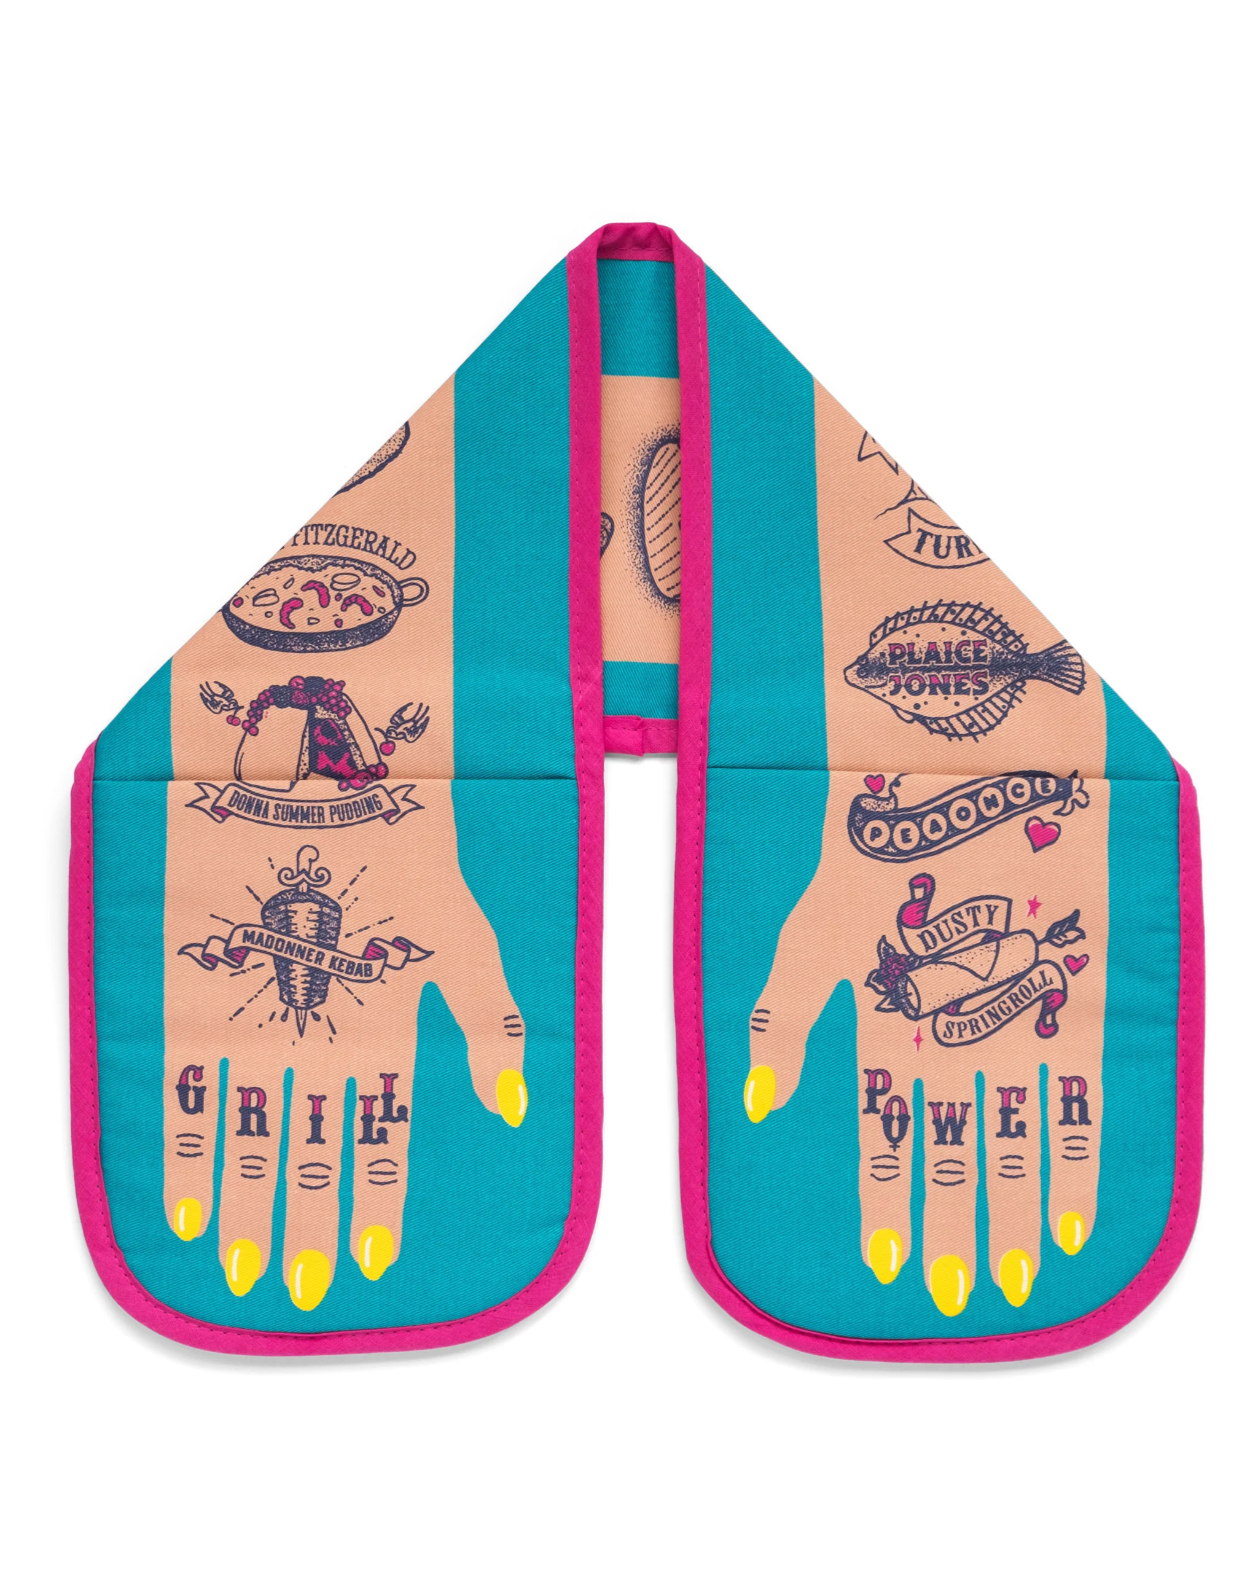 The Every Space 'Grill Power' double oven gloves in light skin design by Stuart Gardiner